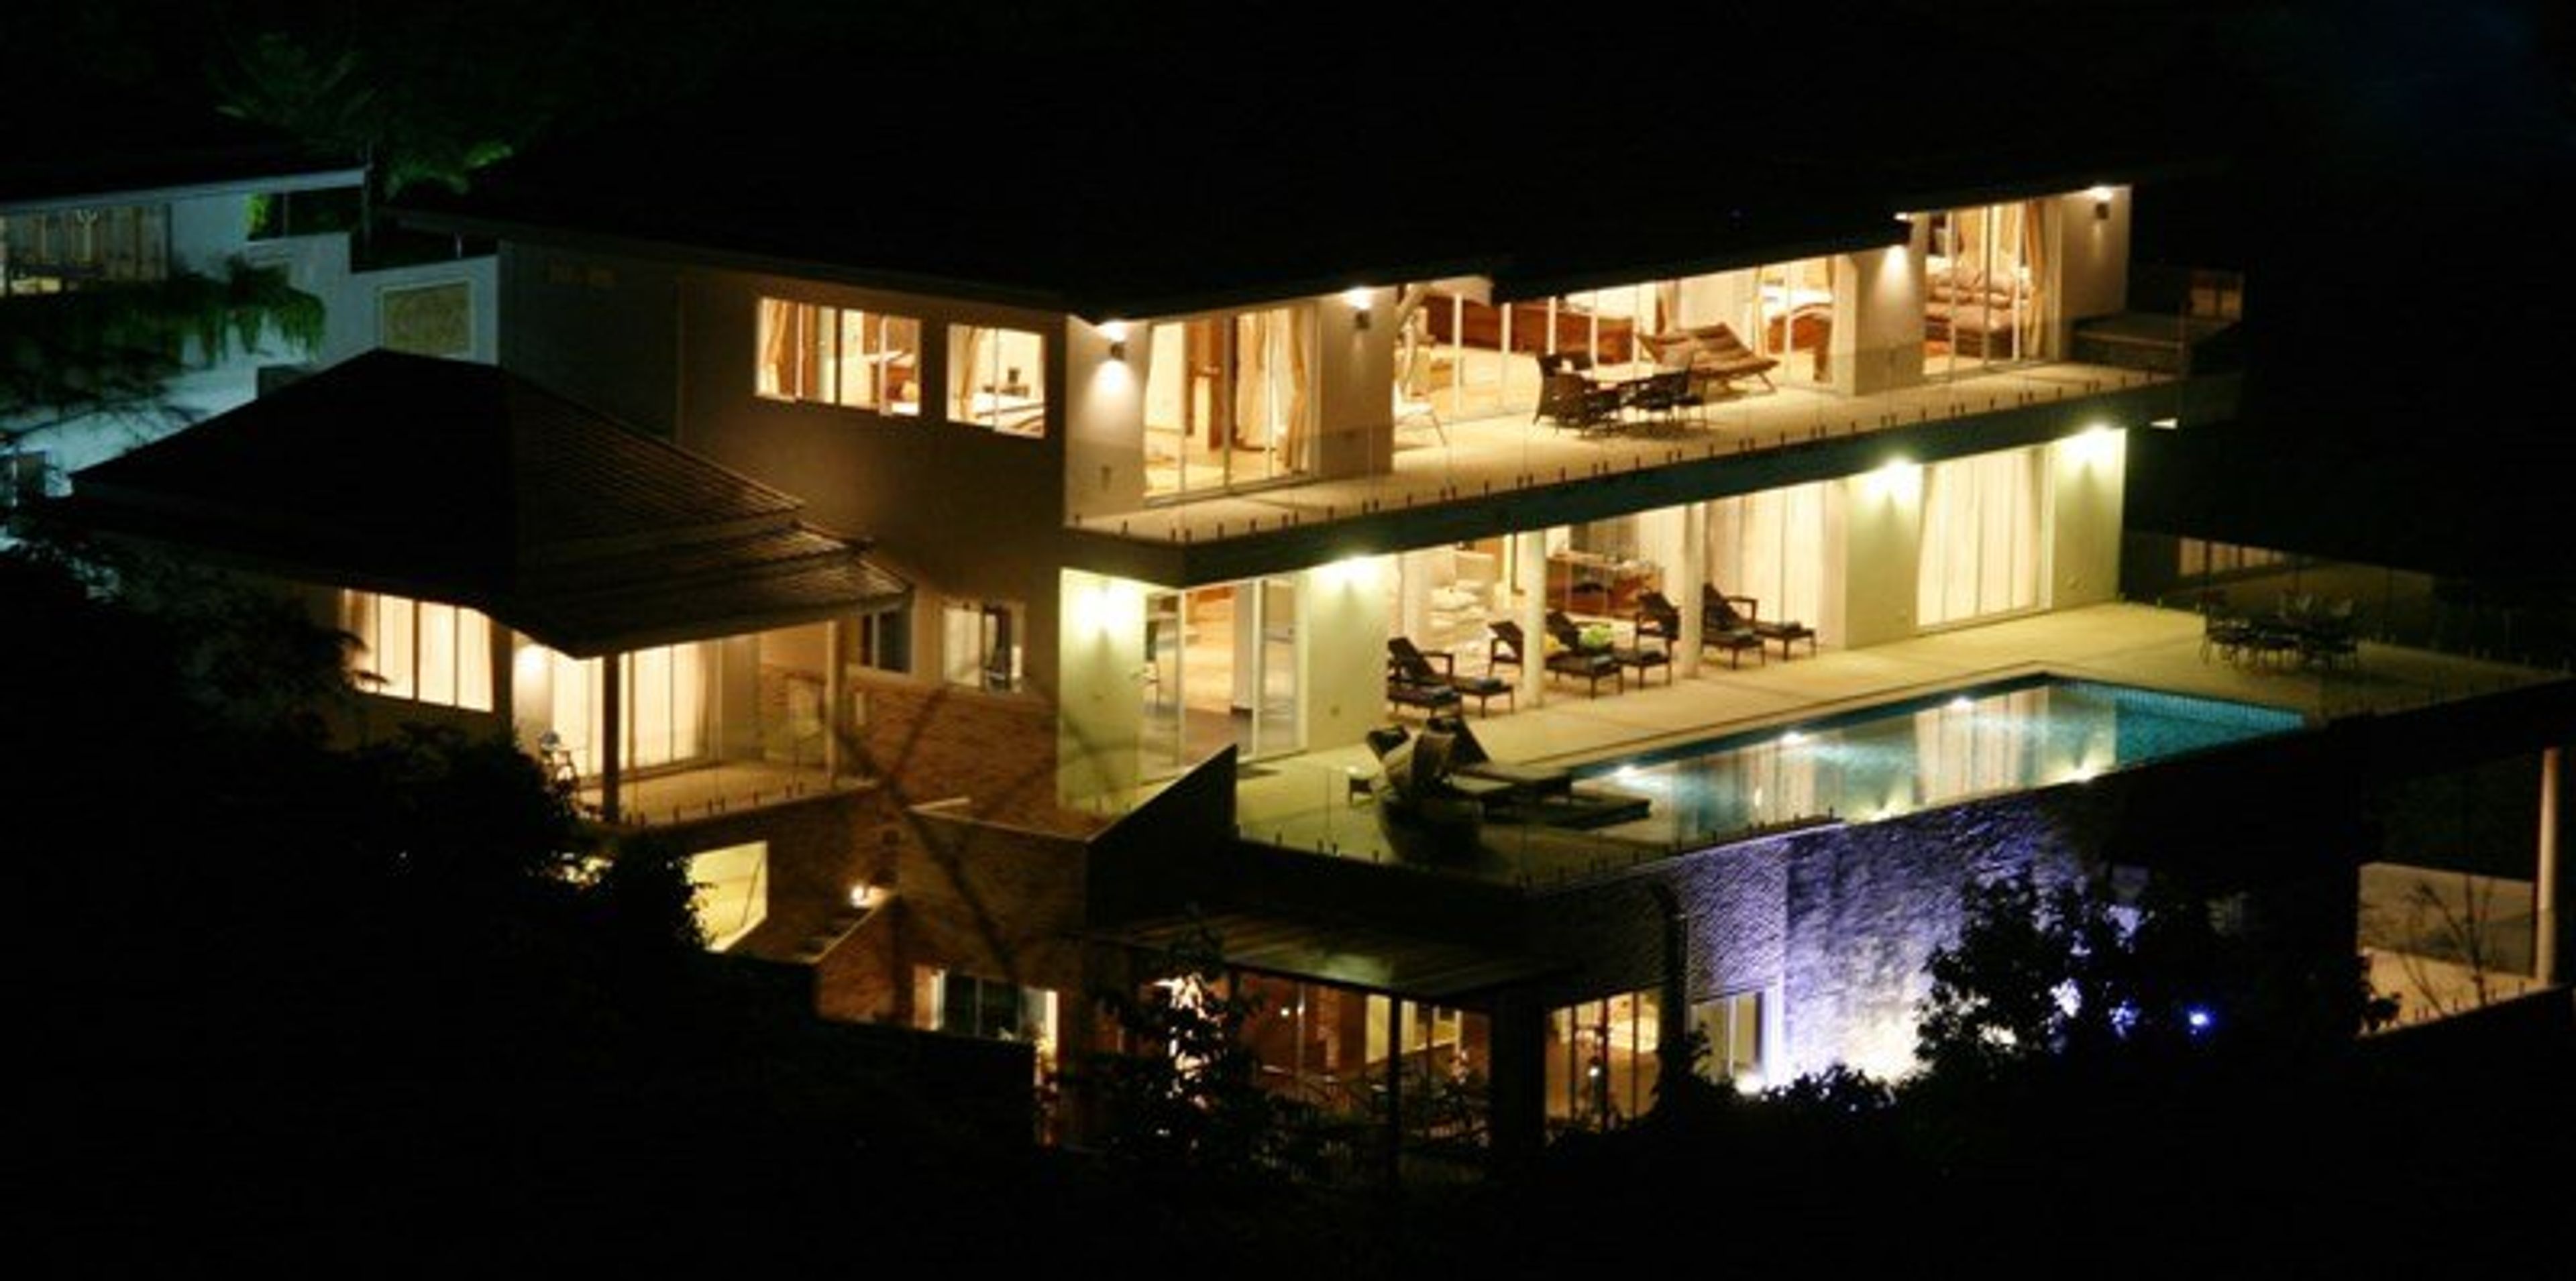 View of the very substantial villa at night